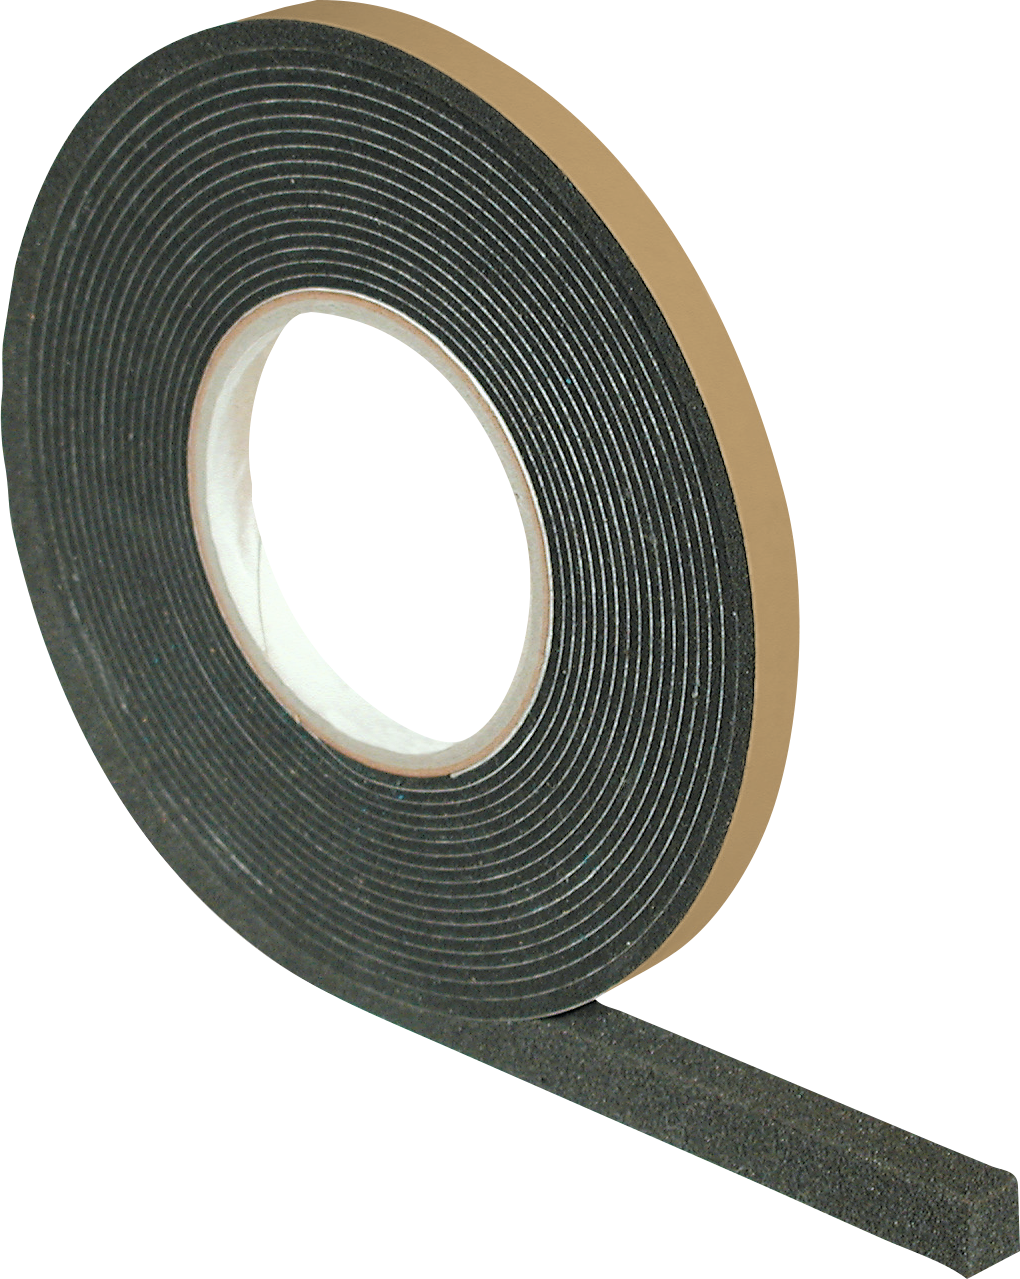 OTTO FUGENBAND BG1 25/10 A VE 13.2M 3.3M/ROLLE